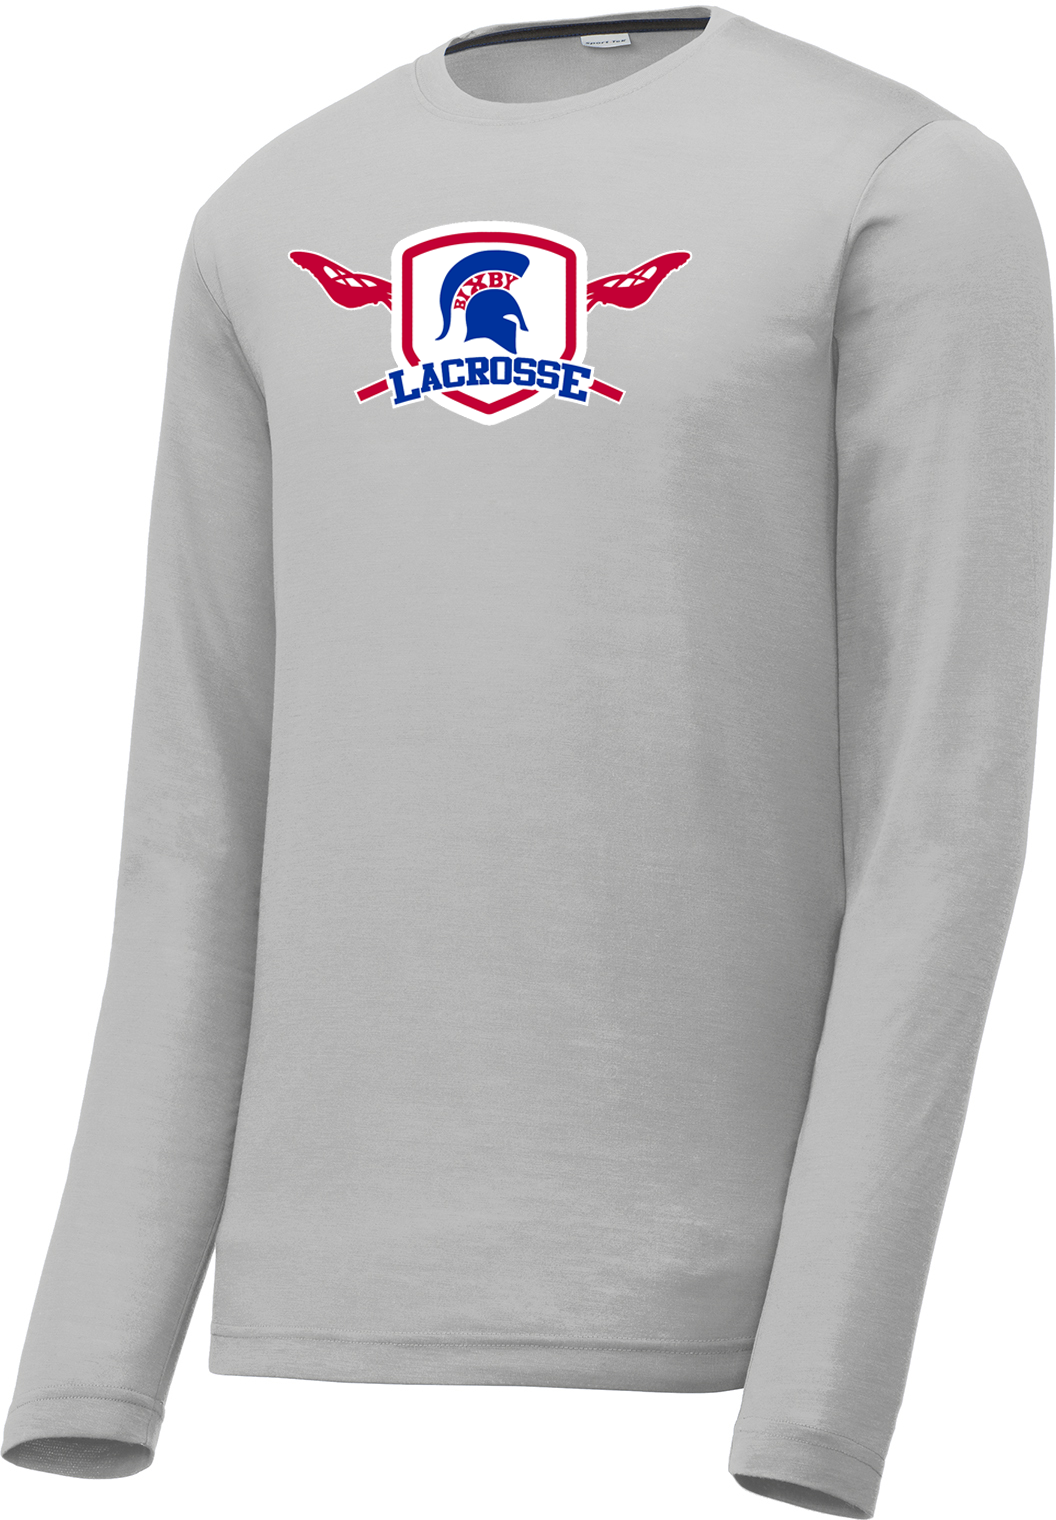 Bixby Lacrosse Silver Long Sleeve CottonTouch Performance Shirt